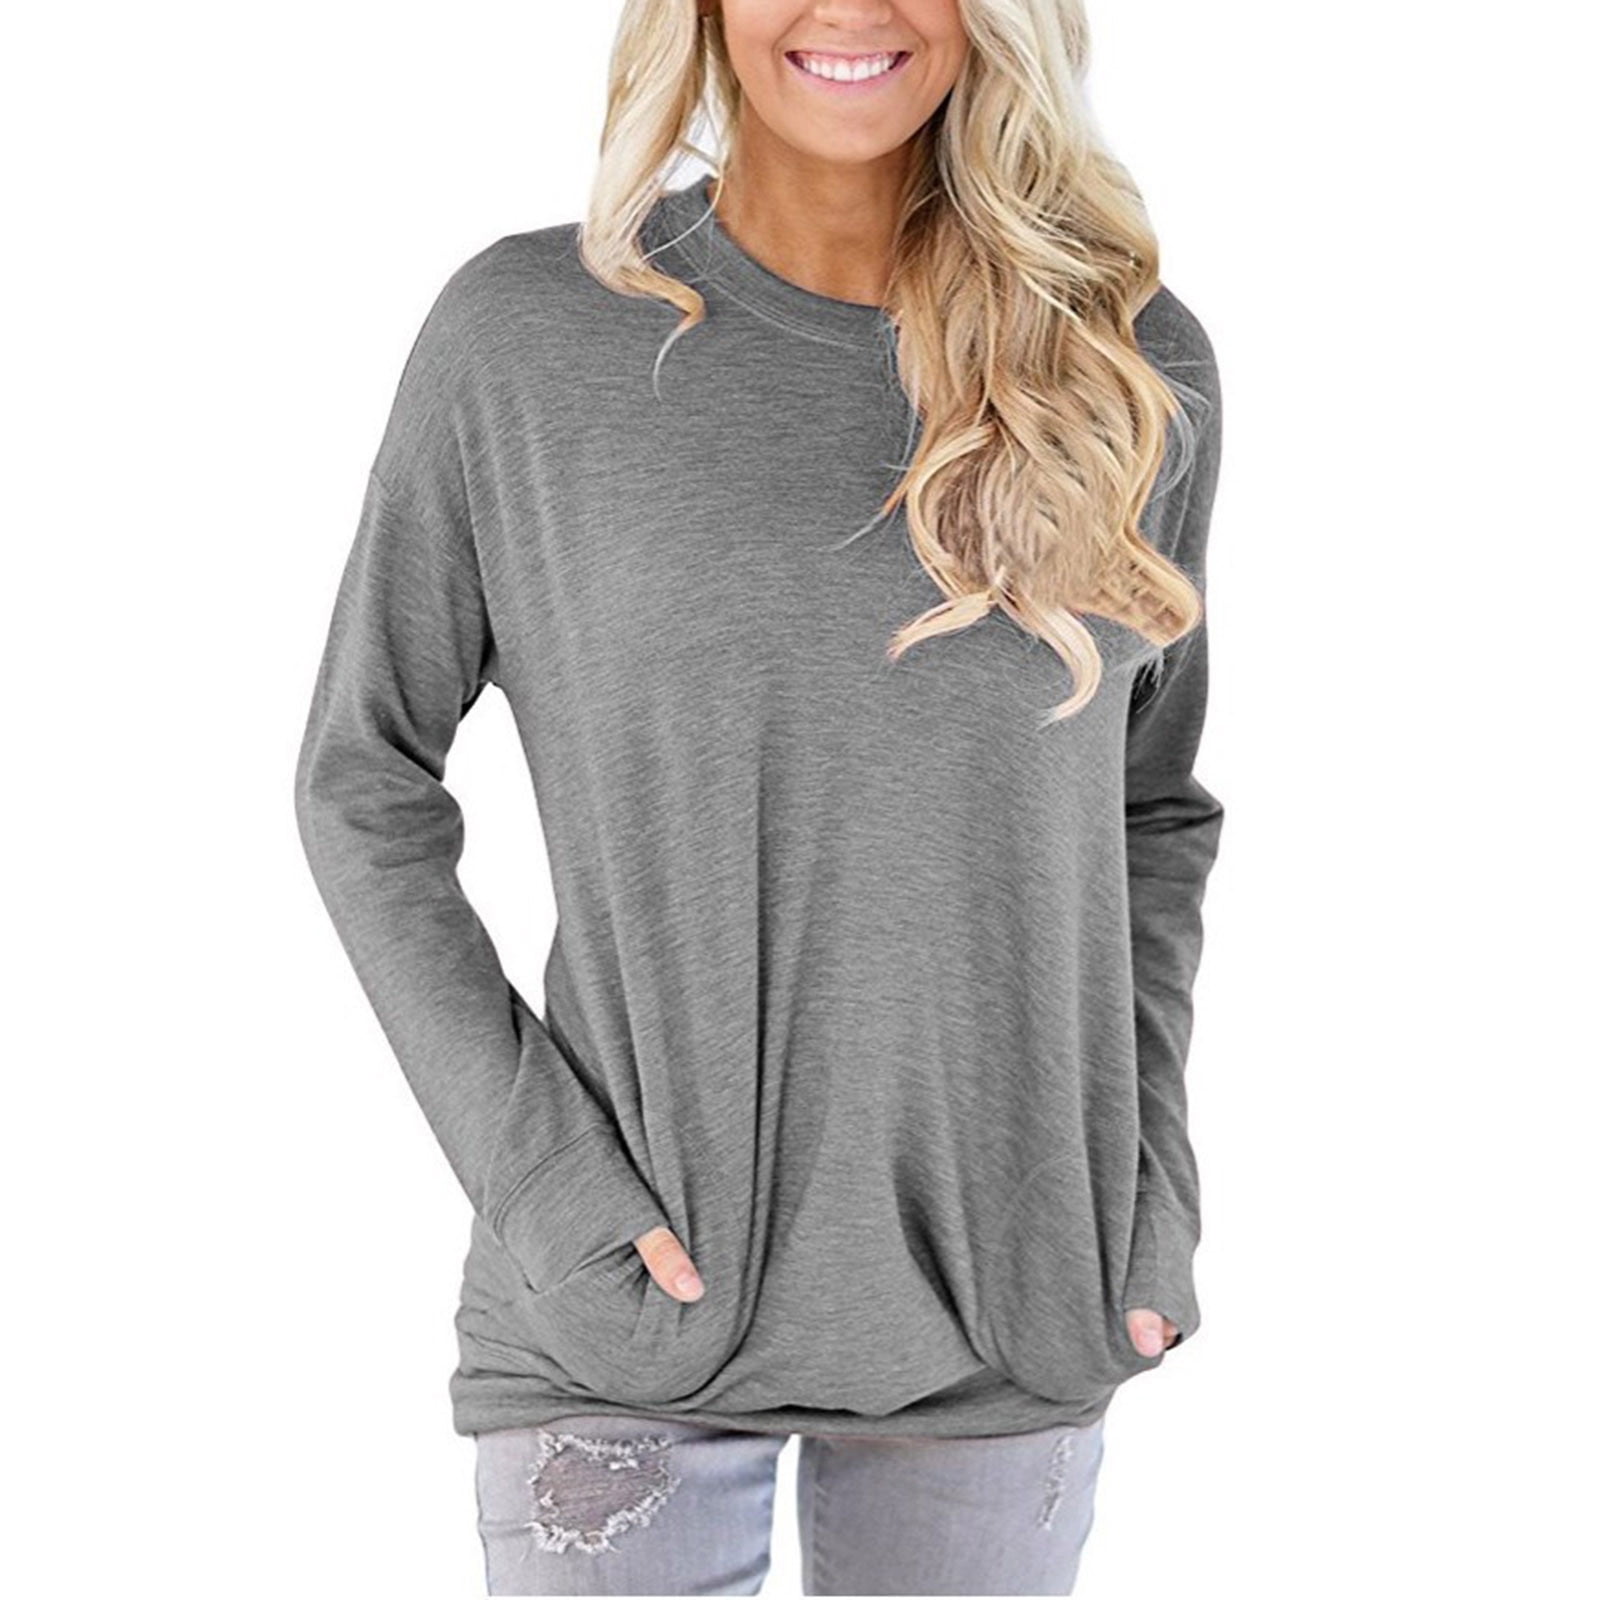 Women's Casual Loose Fit Tunic Tops Long Sleeve Comfy Pockets Sweatshirts  Teen Girls Trendy Stuff Clothes Pullover Blouses 